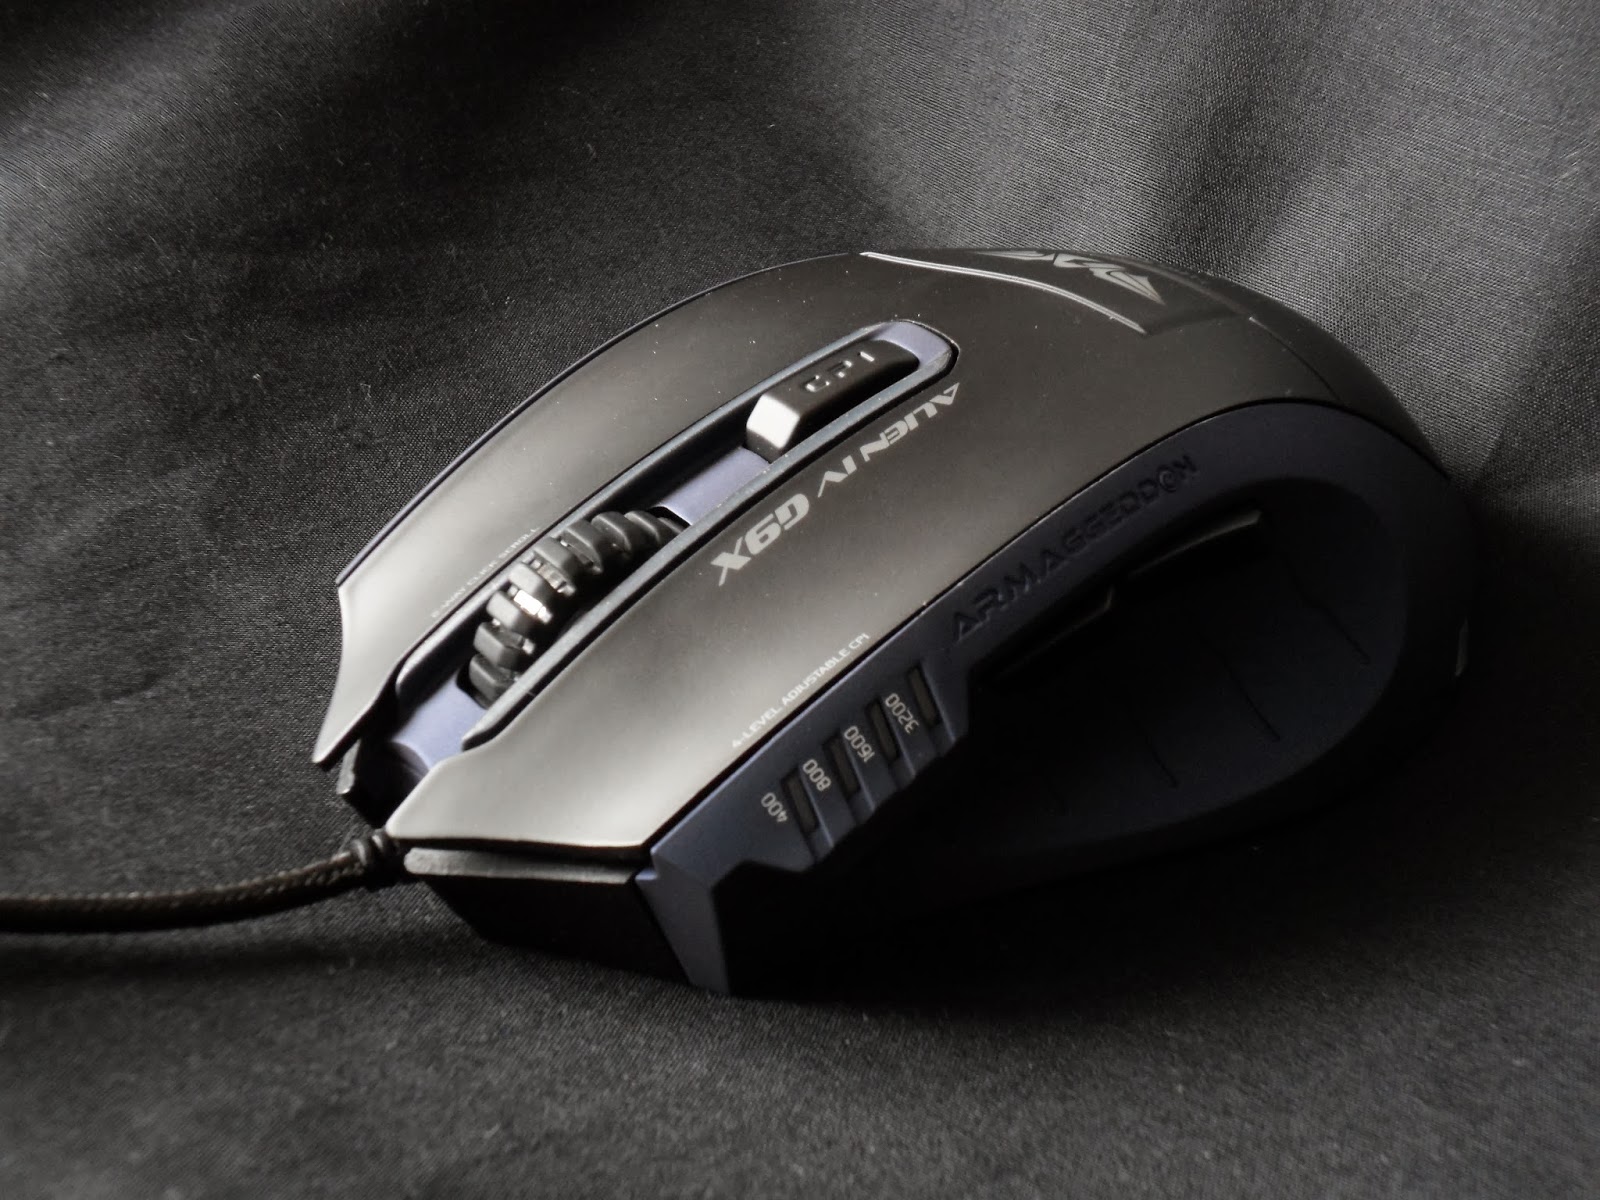 First Look & Review - Armaggeddon Alien IV G9X Optical Gaming Mouse 4